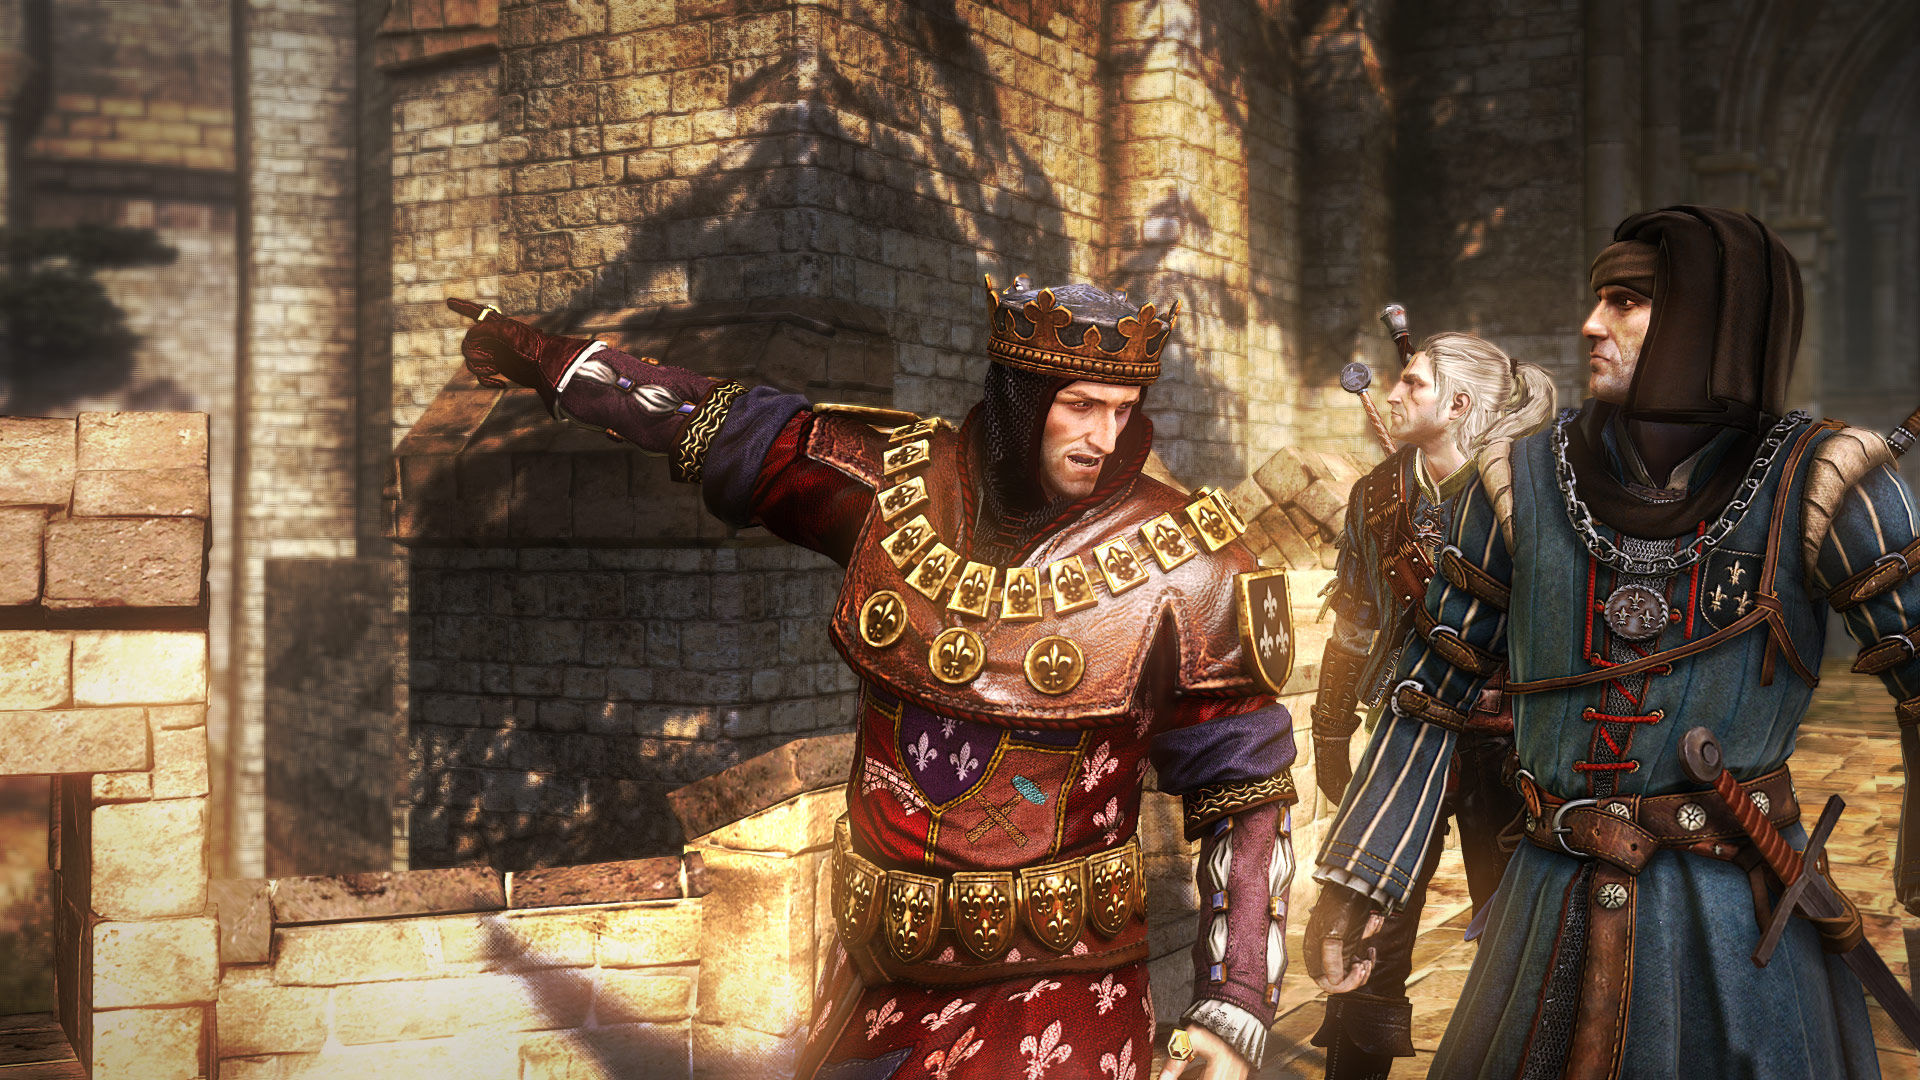 The Witcher 2: Assassins of Kings - Enhanced Edition Review